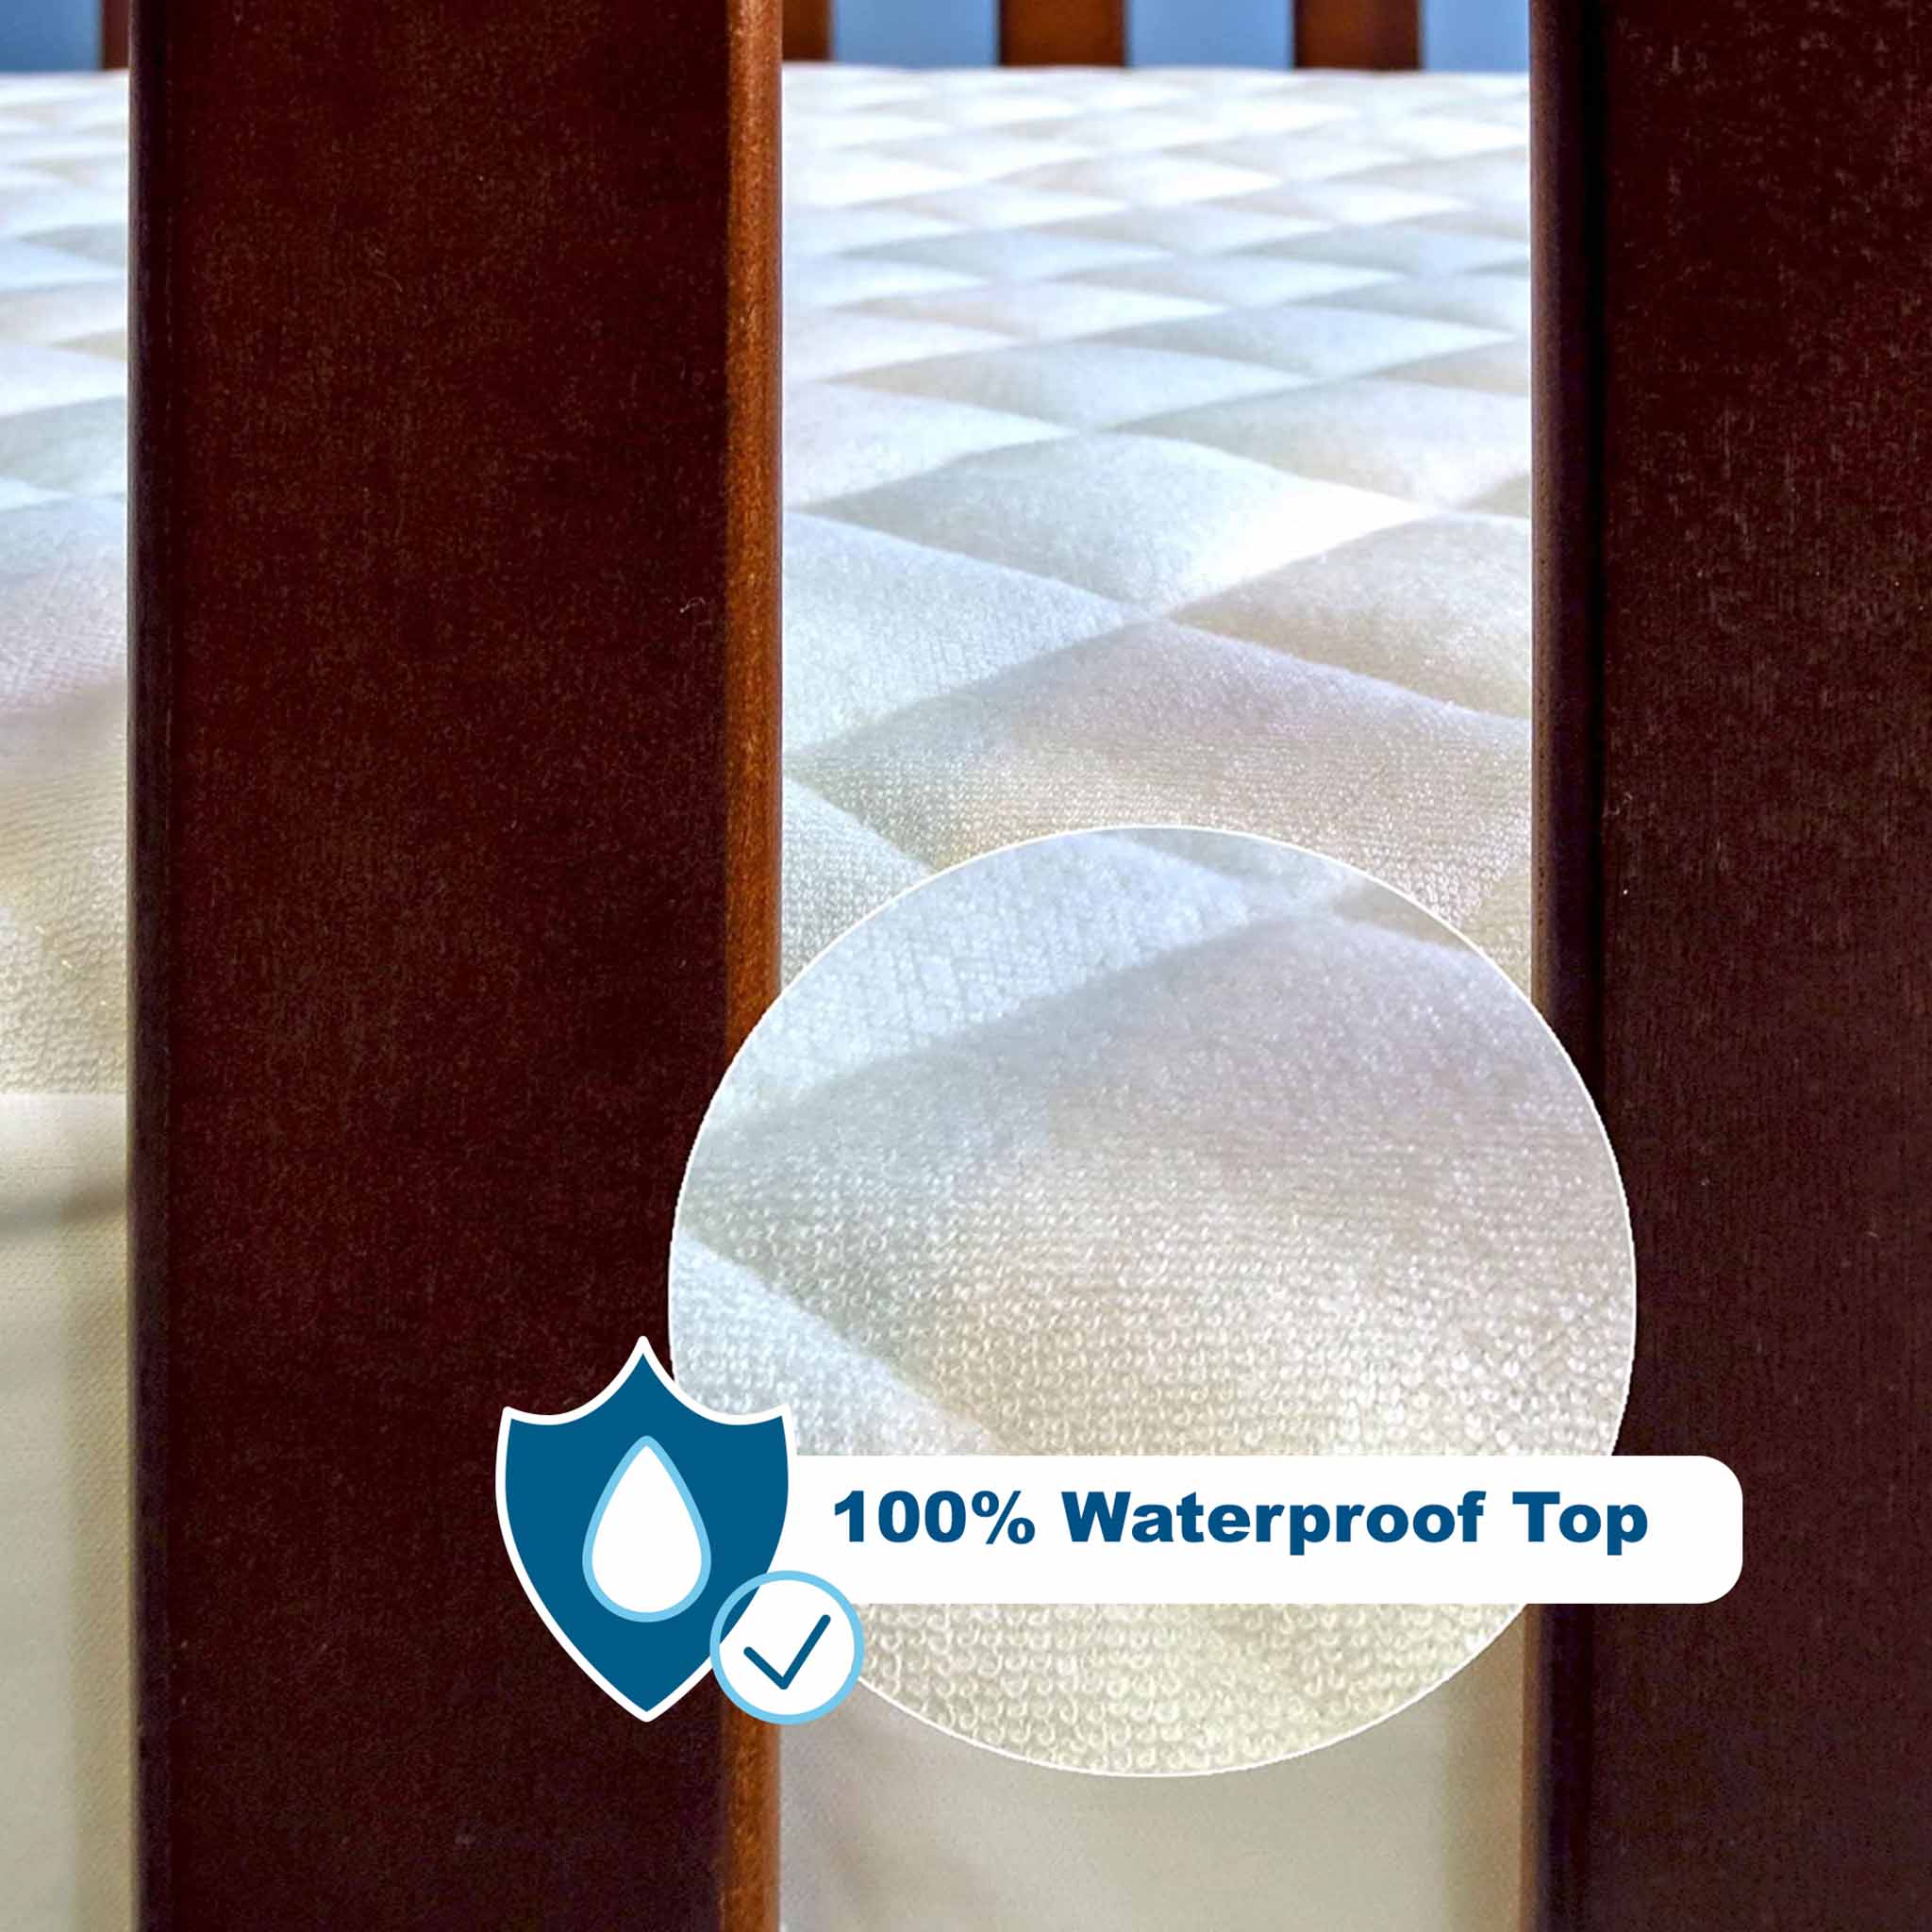 GUARANTEED ZERO LIQUID PENETRATION: Protect your baby’s mattress with this 100% waterproof crib pad protector cover.